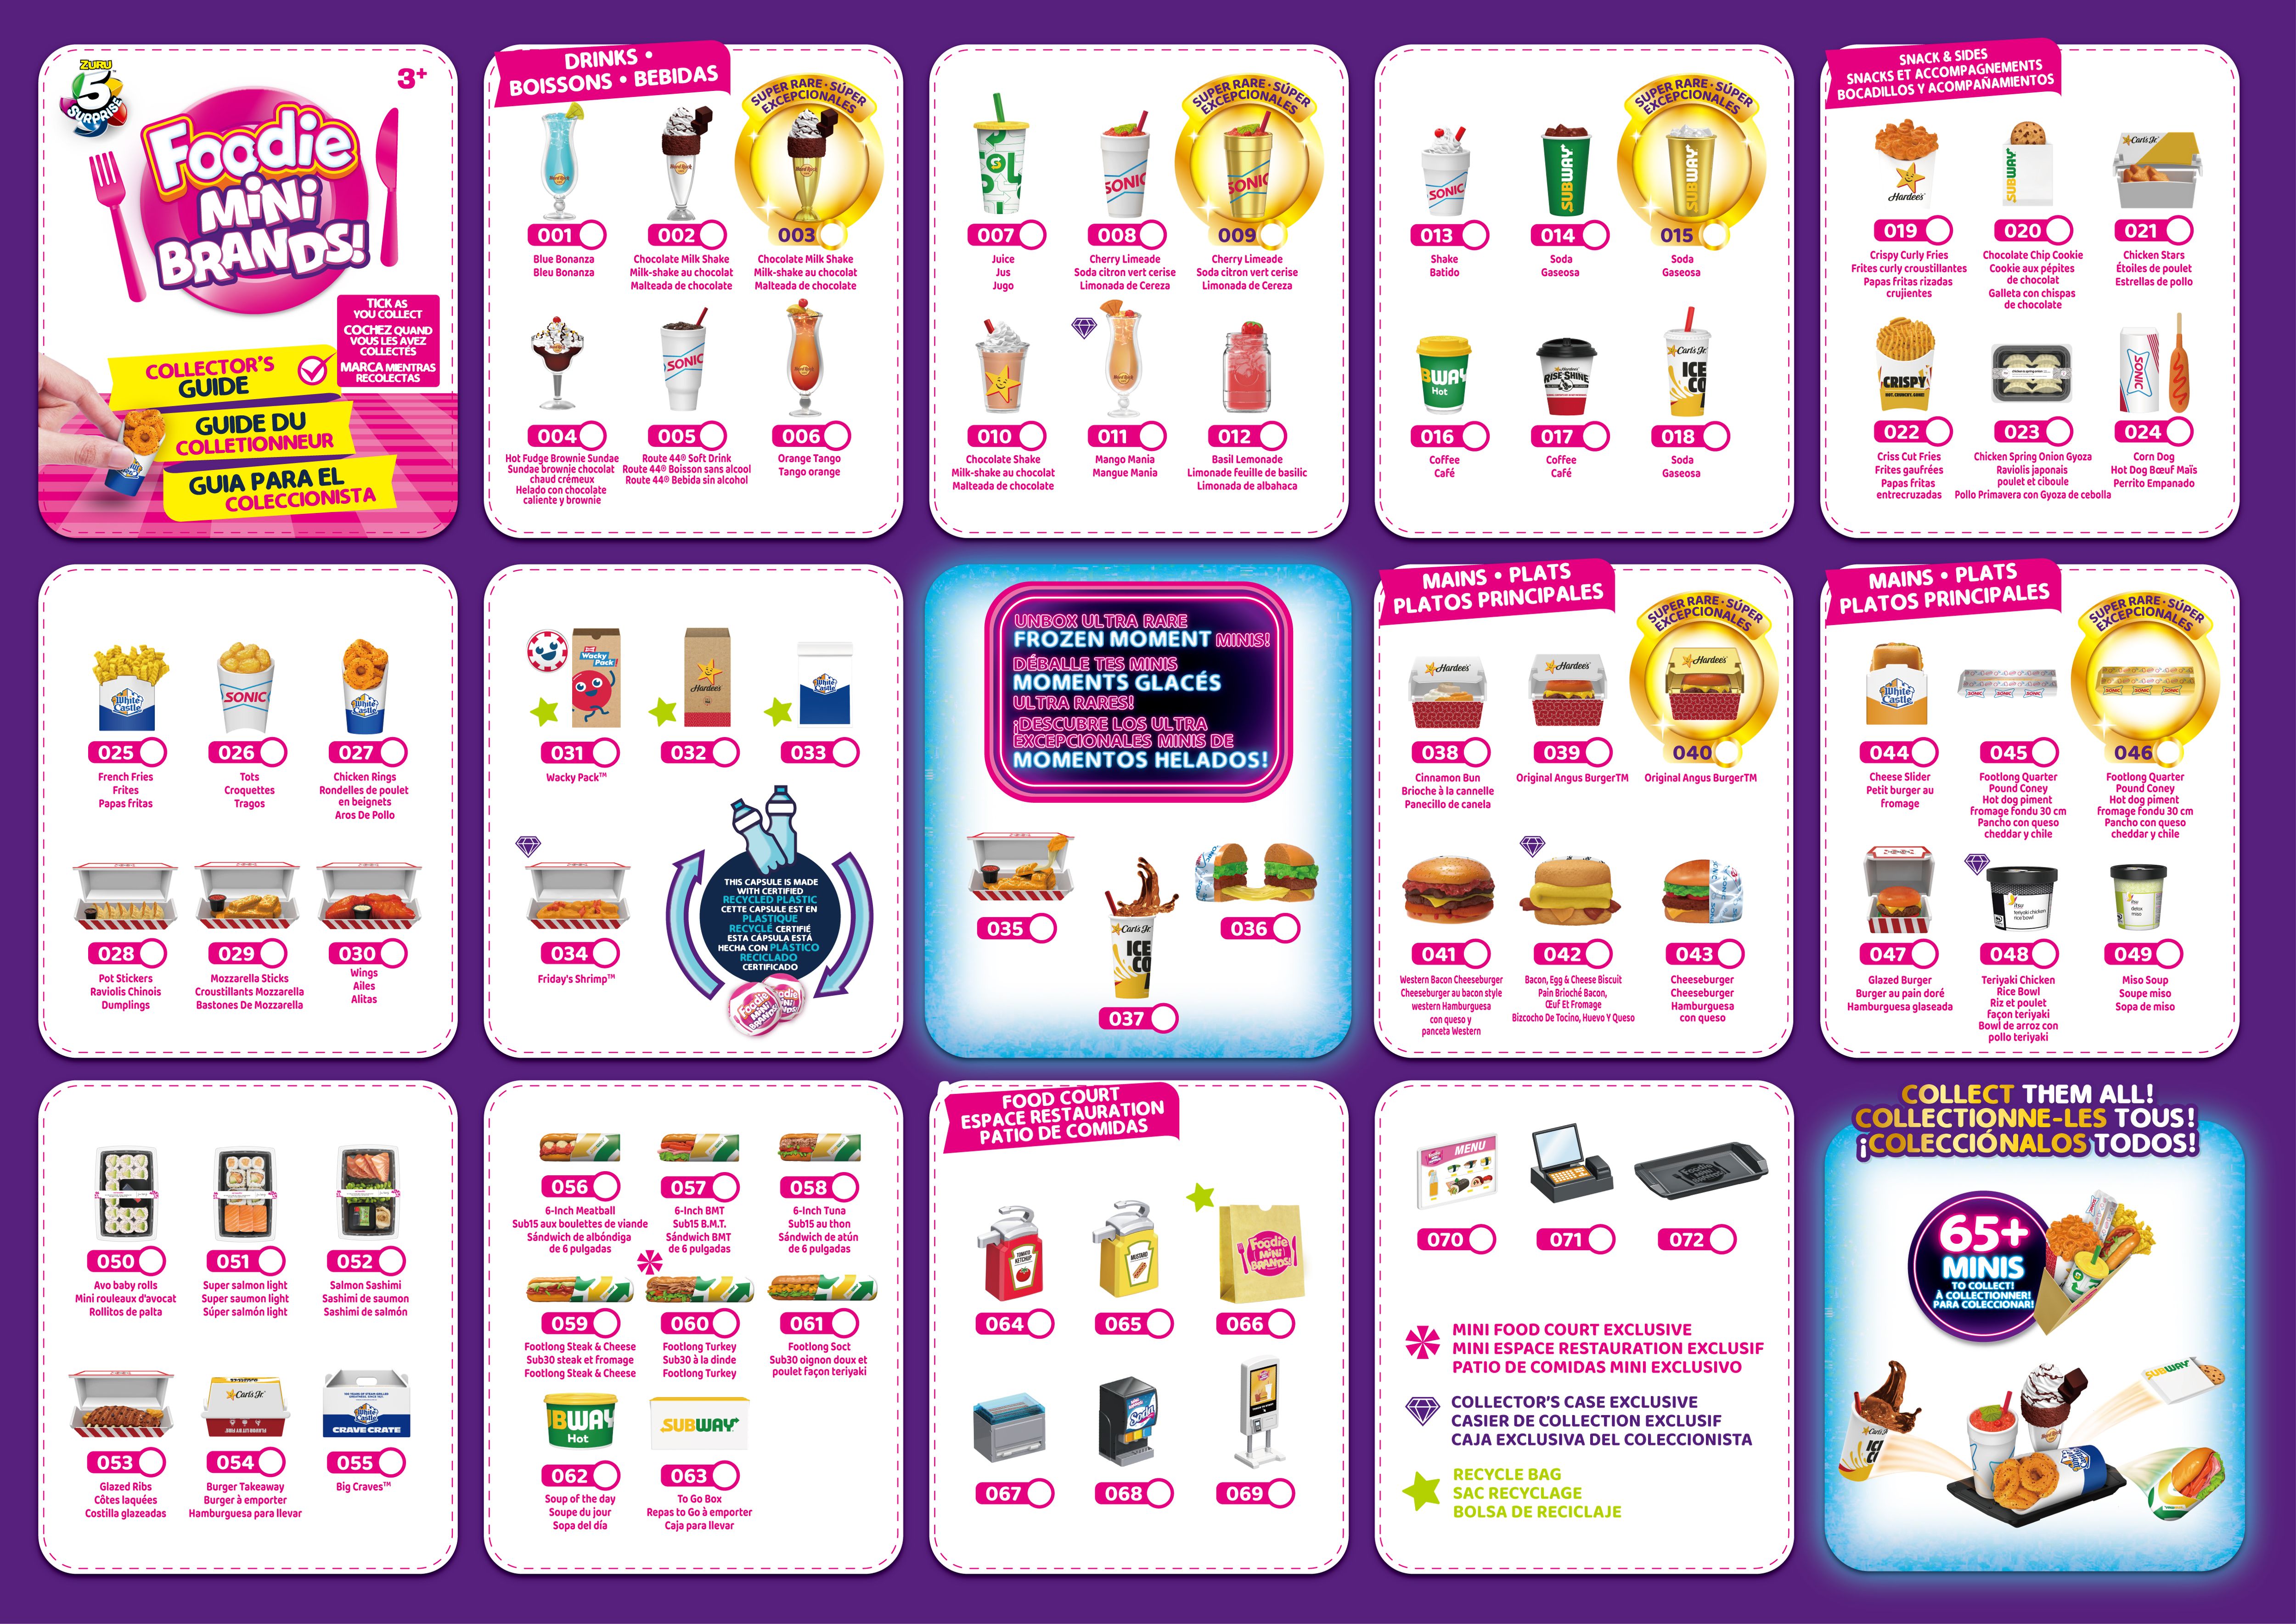 Series 4, Gold Rush toys, Foodies offically up on Zuru website. :  r/MiniBrands